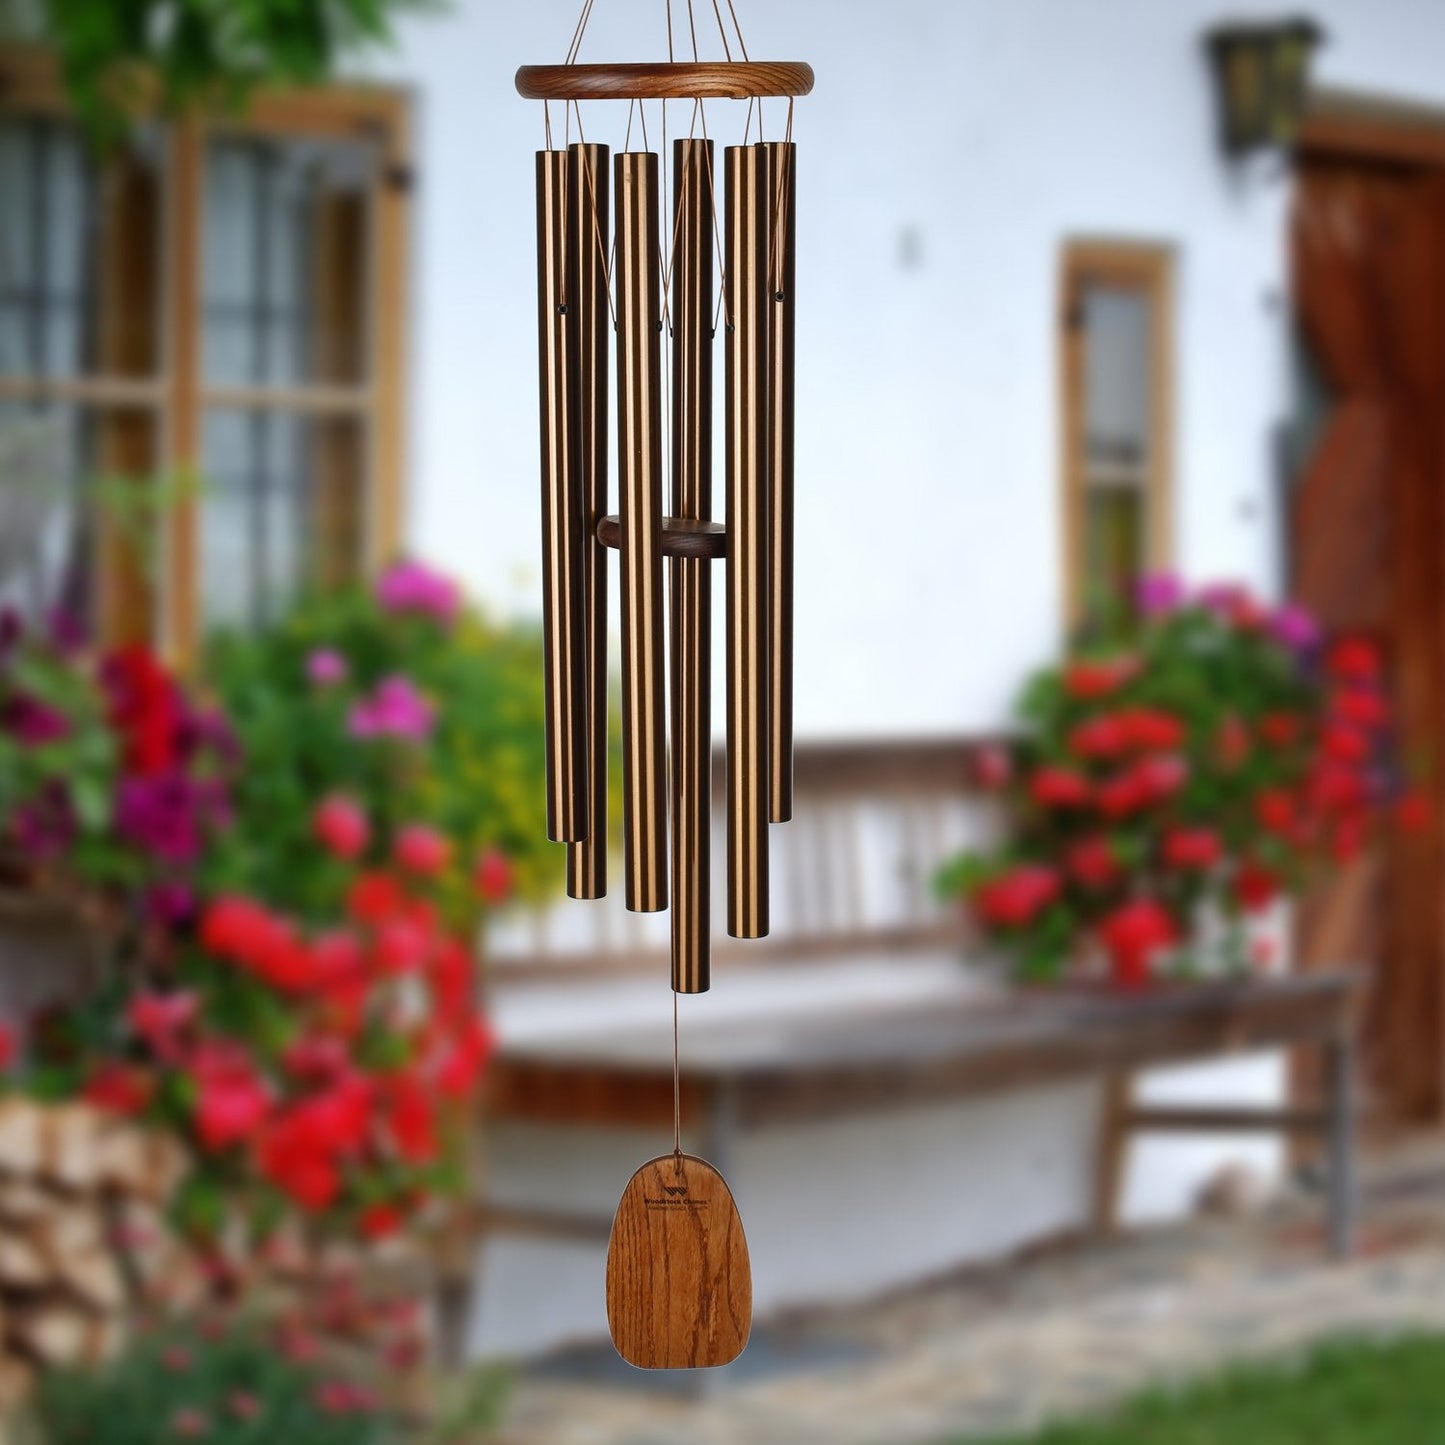 chime with flowers and porch scene in background.